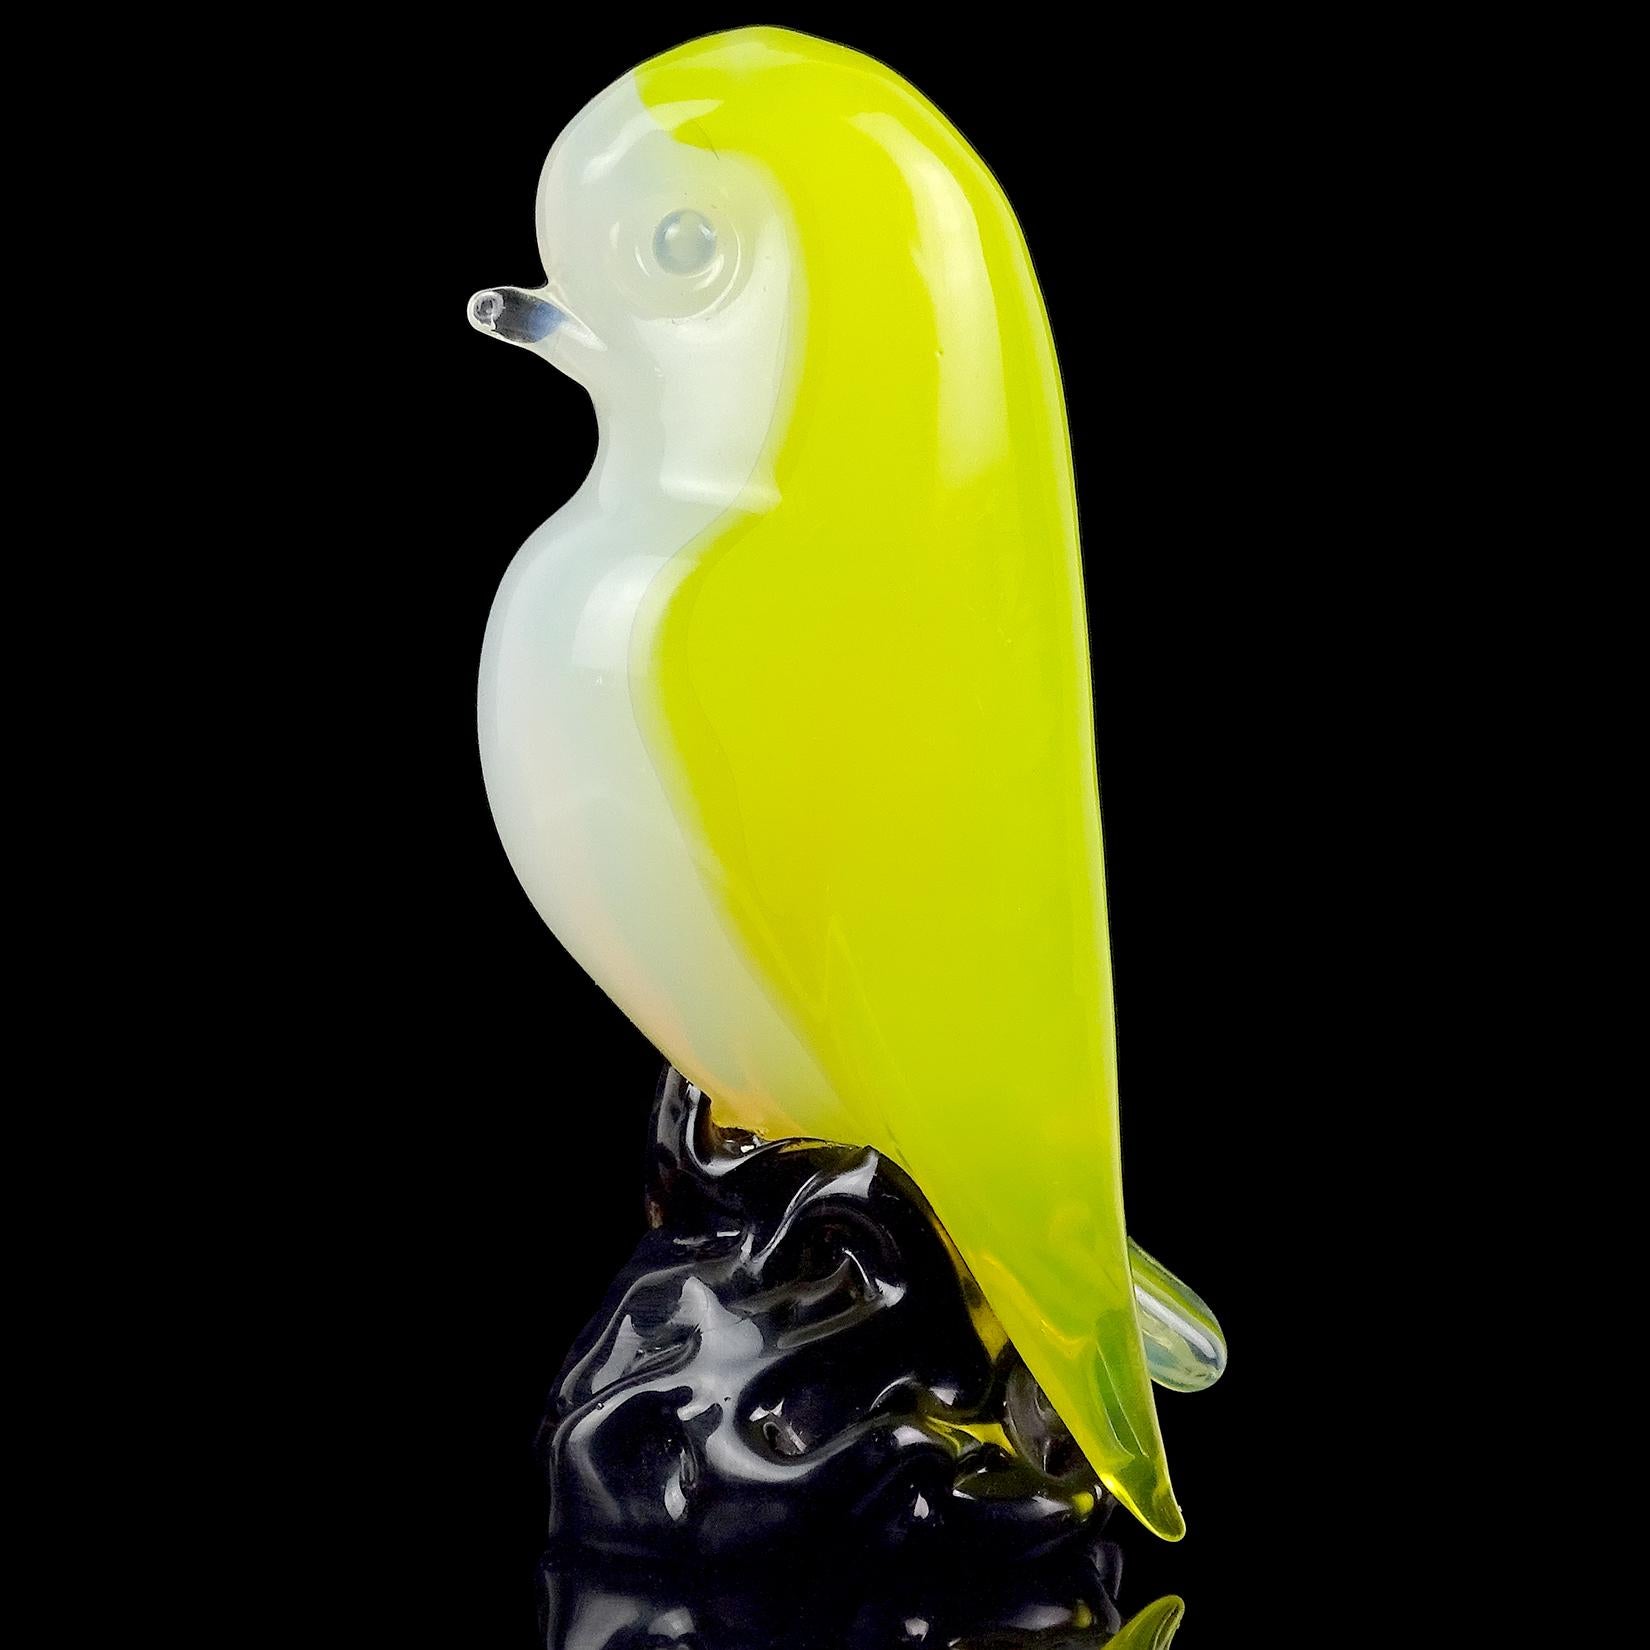 Beautiful vintage Murano hand blown, opalescent white and bright yellow Italian art glass bird figurine / sculpture. Documented to designer Archimede Seguso. This cute bird has contrasting blue eyes to his yellow feathers, and stands on a dark base.